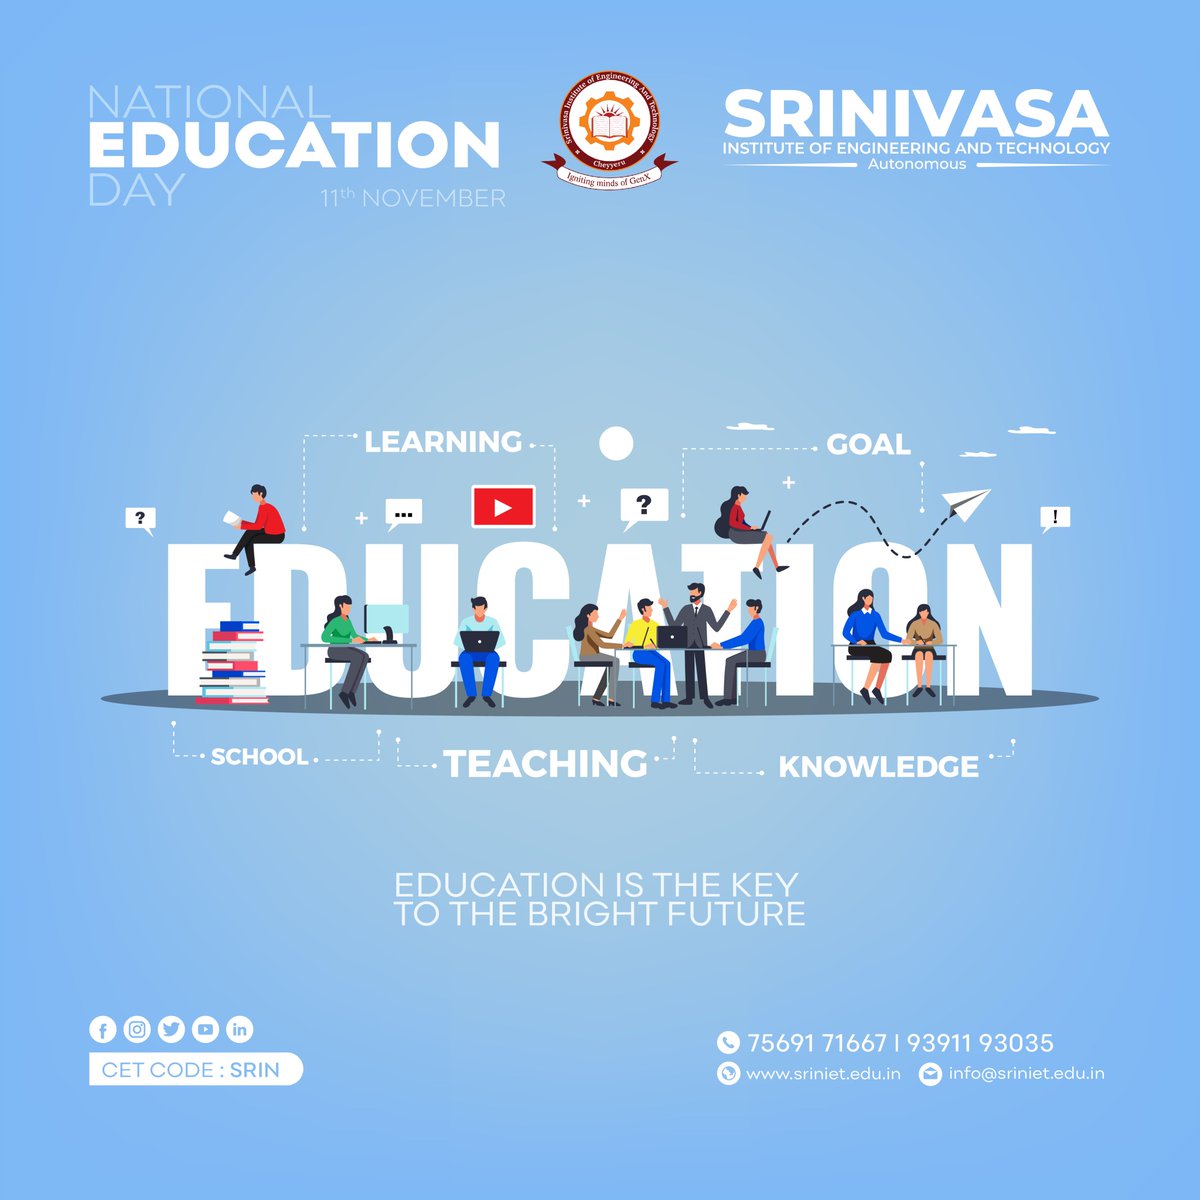 Srinivasa in shaping a brighter future! 🌟 

We nurture young minds with passion and purpose. 
.
.
.
#sriniet_college #PassionAndPurpose #BrightMinds #InspireInnovation #AcademicExcellence  #StudentLife #HigherEducation #FutureLeaders #NurturingPotential #JoinTheJourney